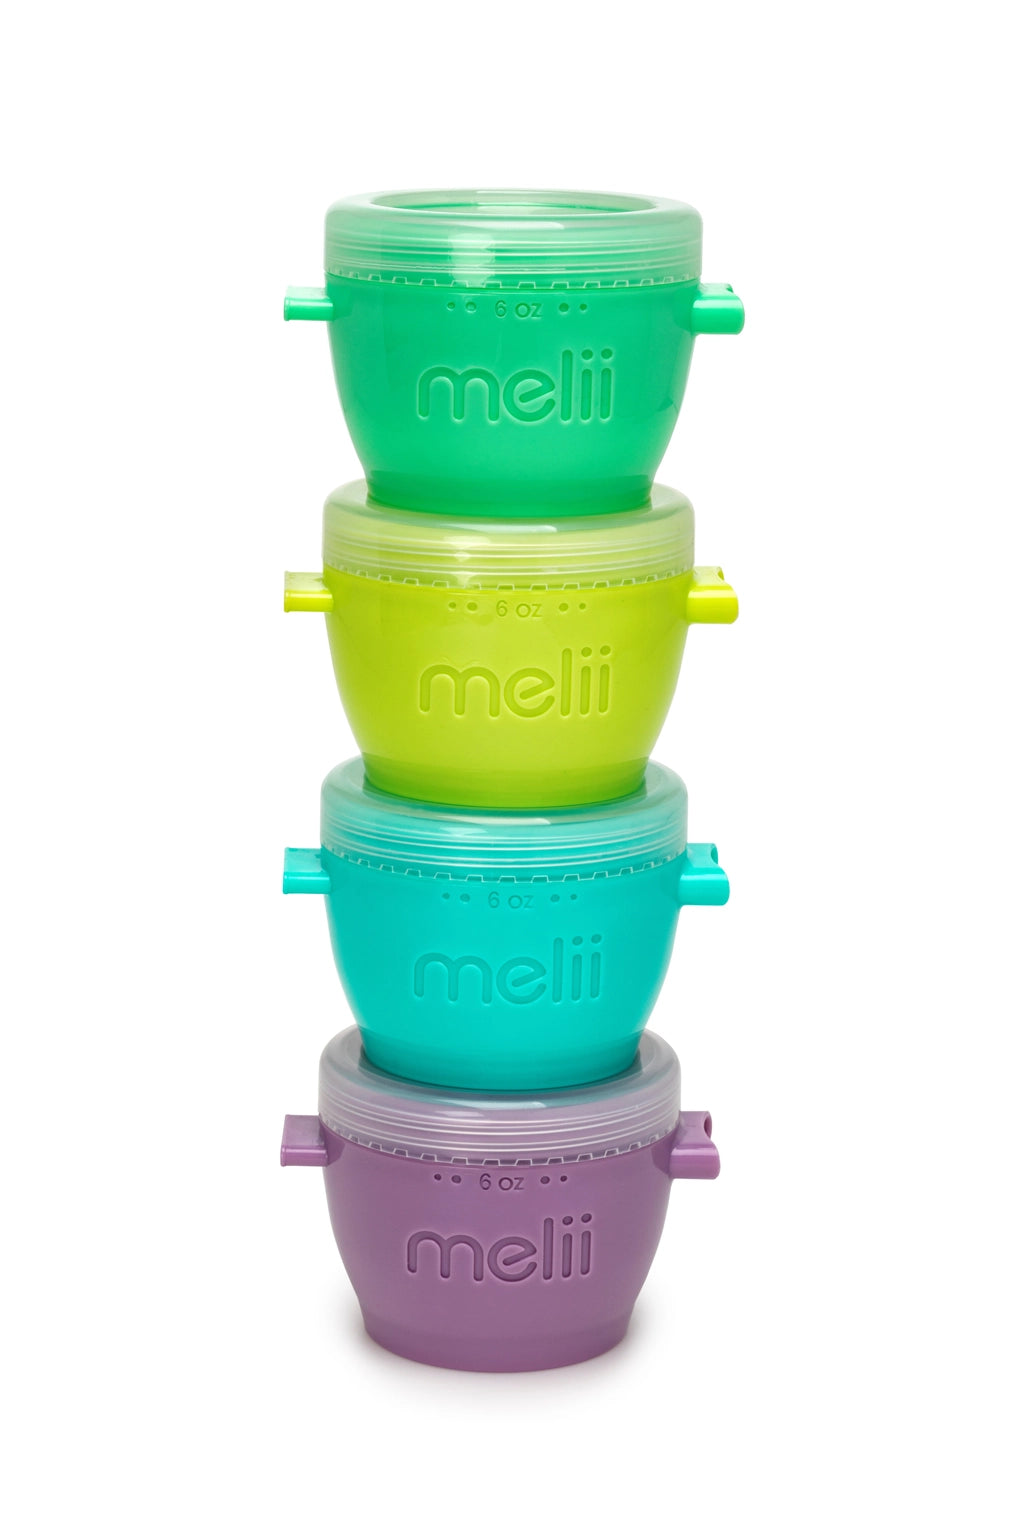 2oz Snap & Go Pods - 6 Freezer & Snack Containers